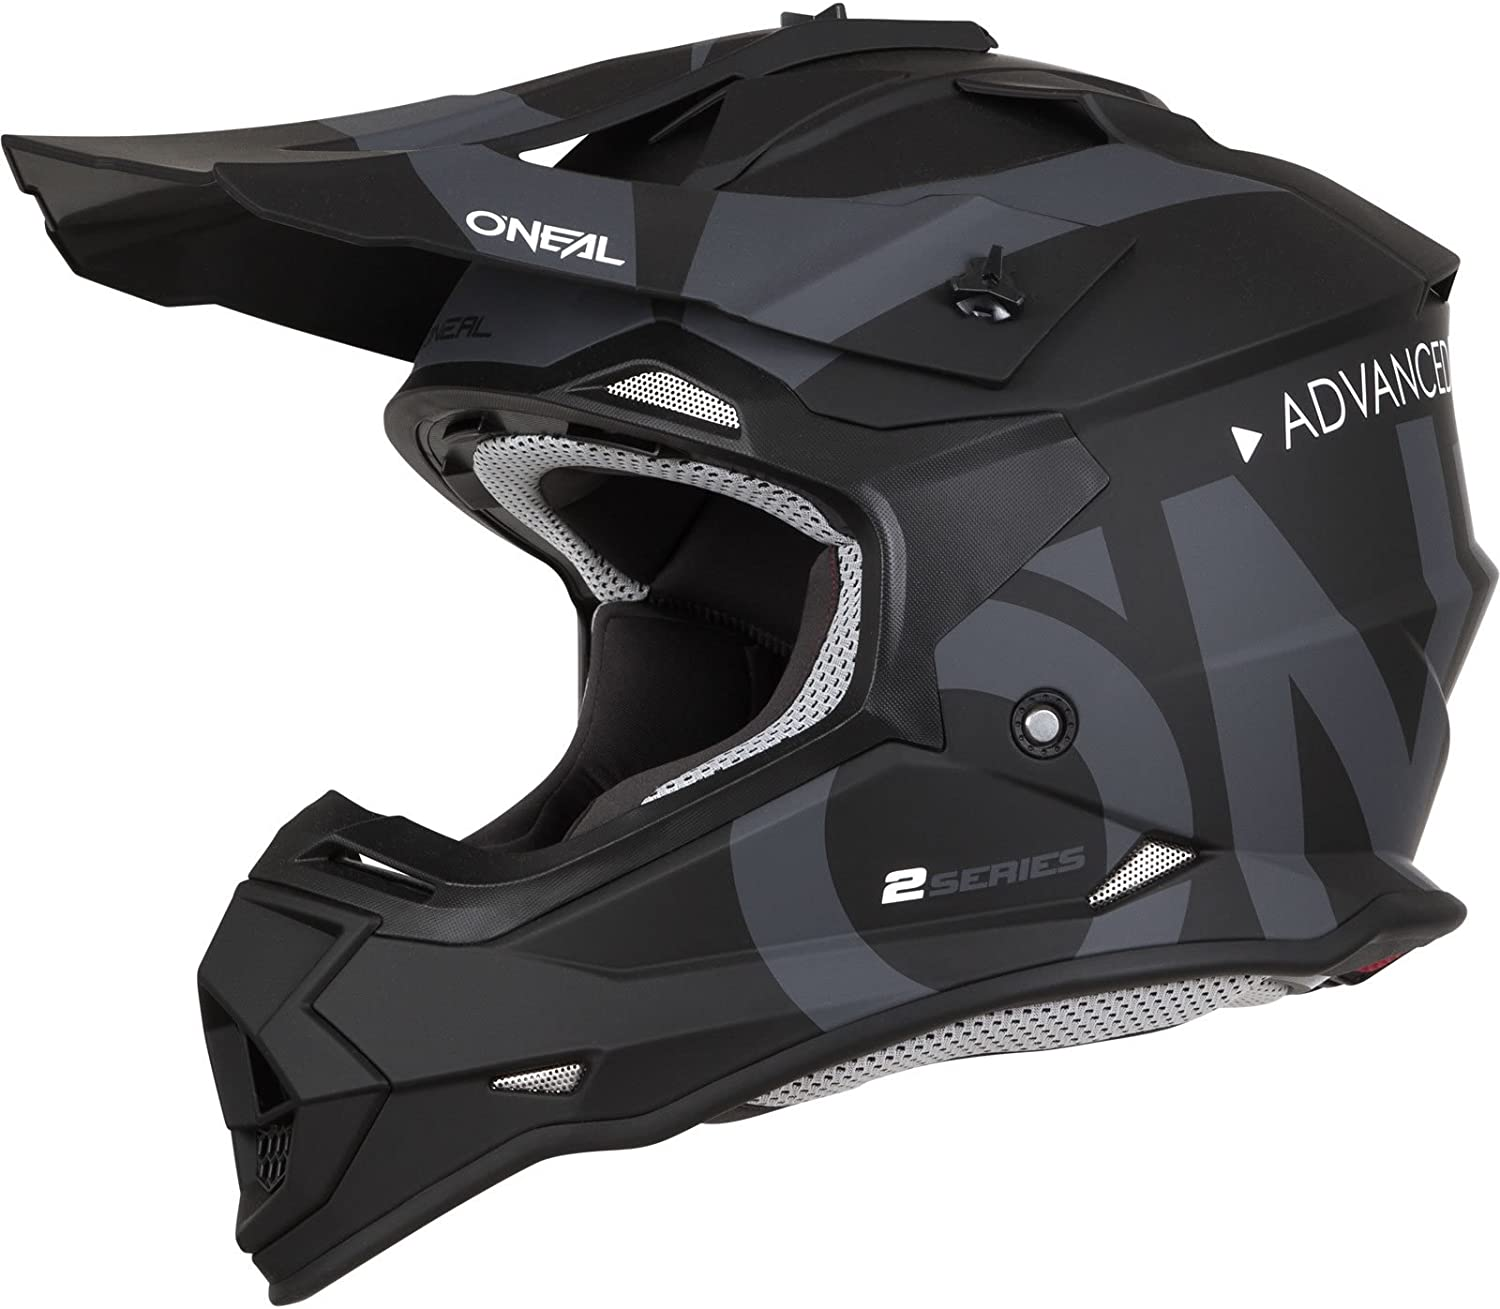 Helmets are an important mountain bike body armor item and this helmet is designed to give you the choice of full-face or half-shell protection.